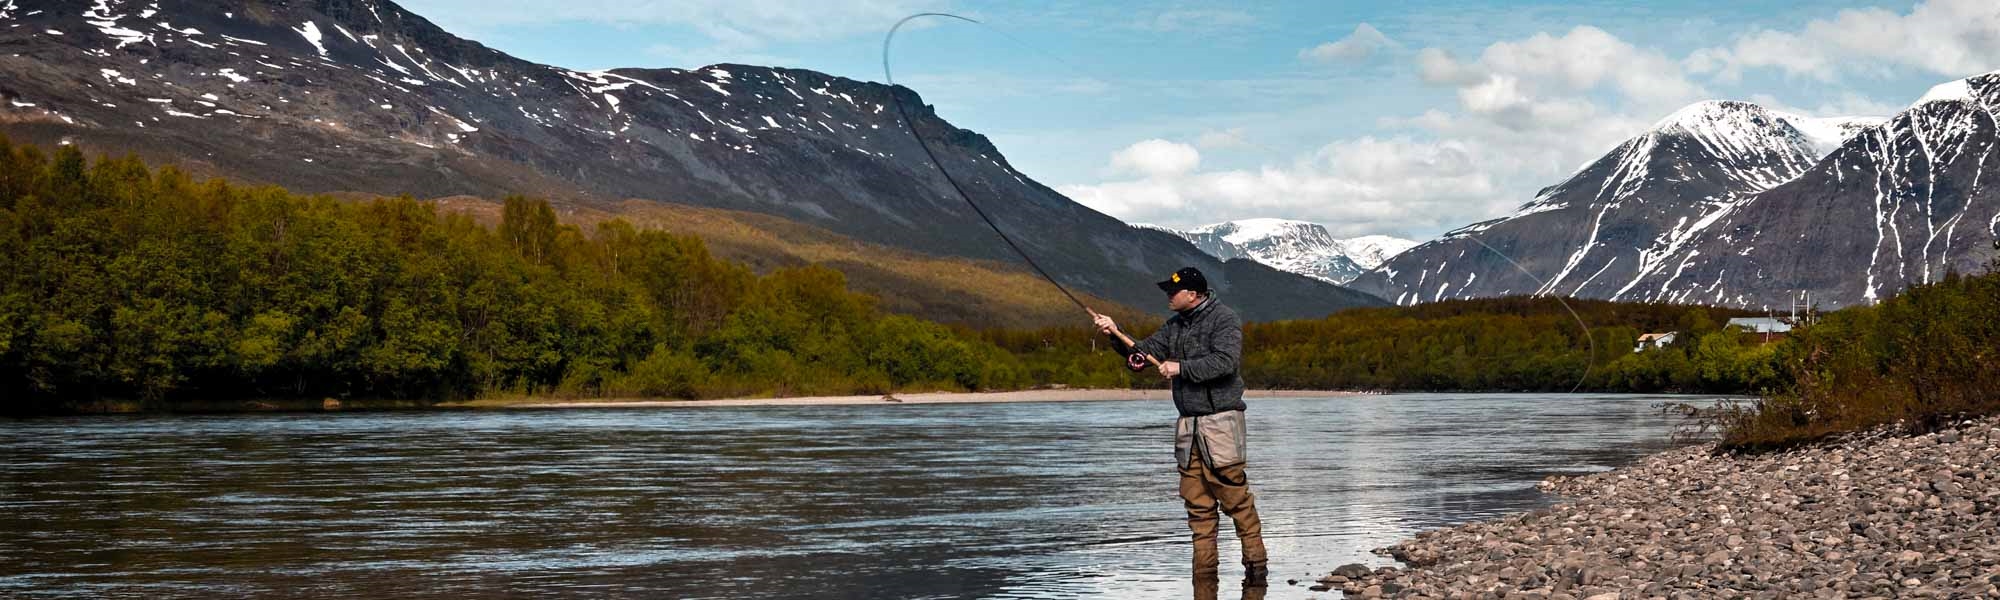 Stream & River Fly Fishing Of Rainbow Trout